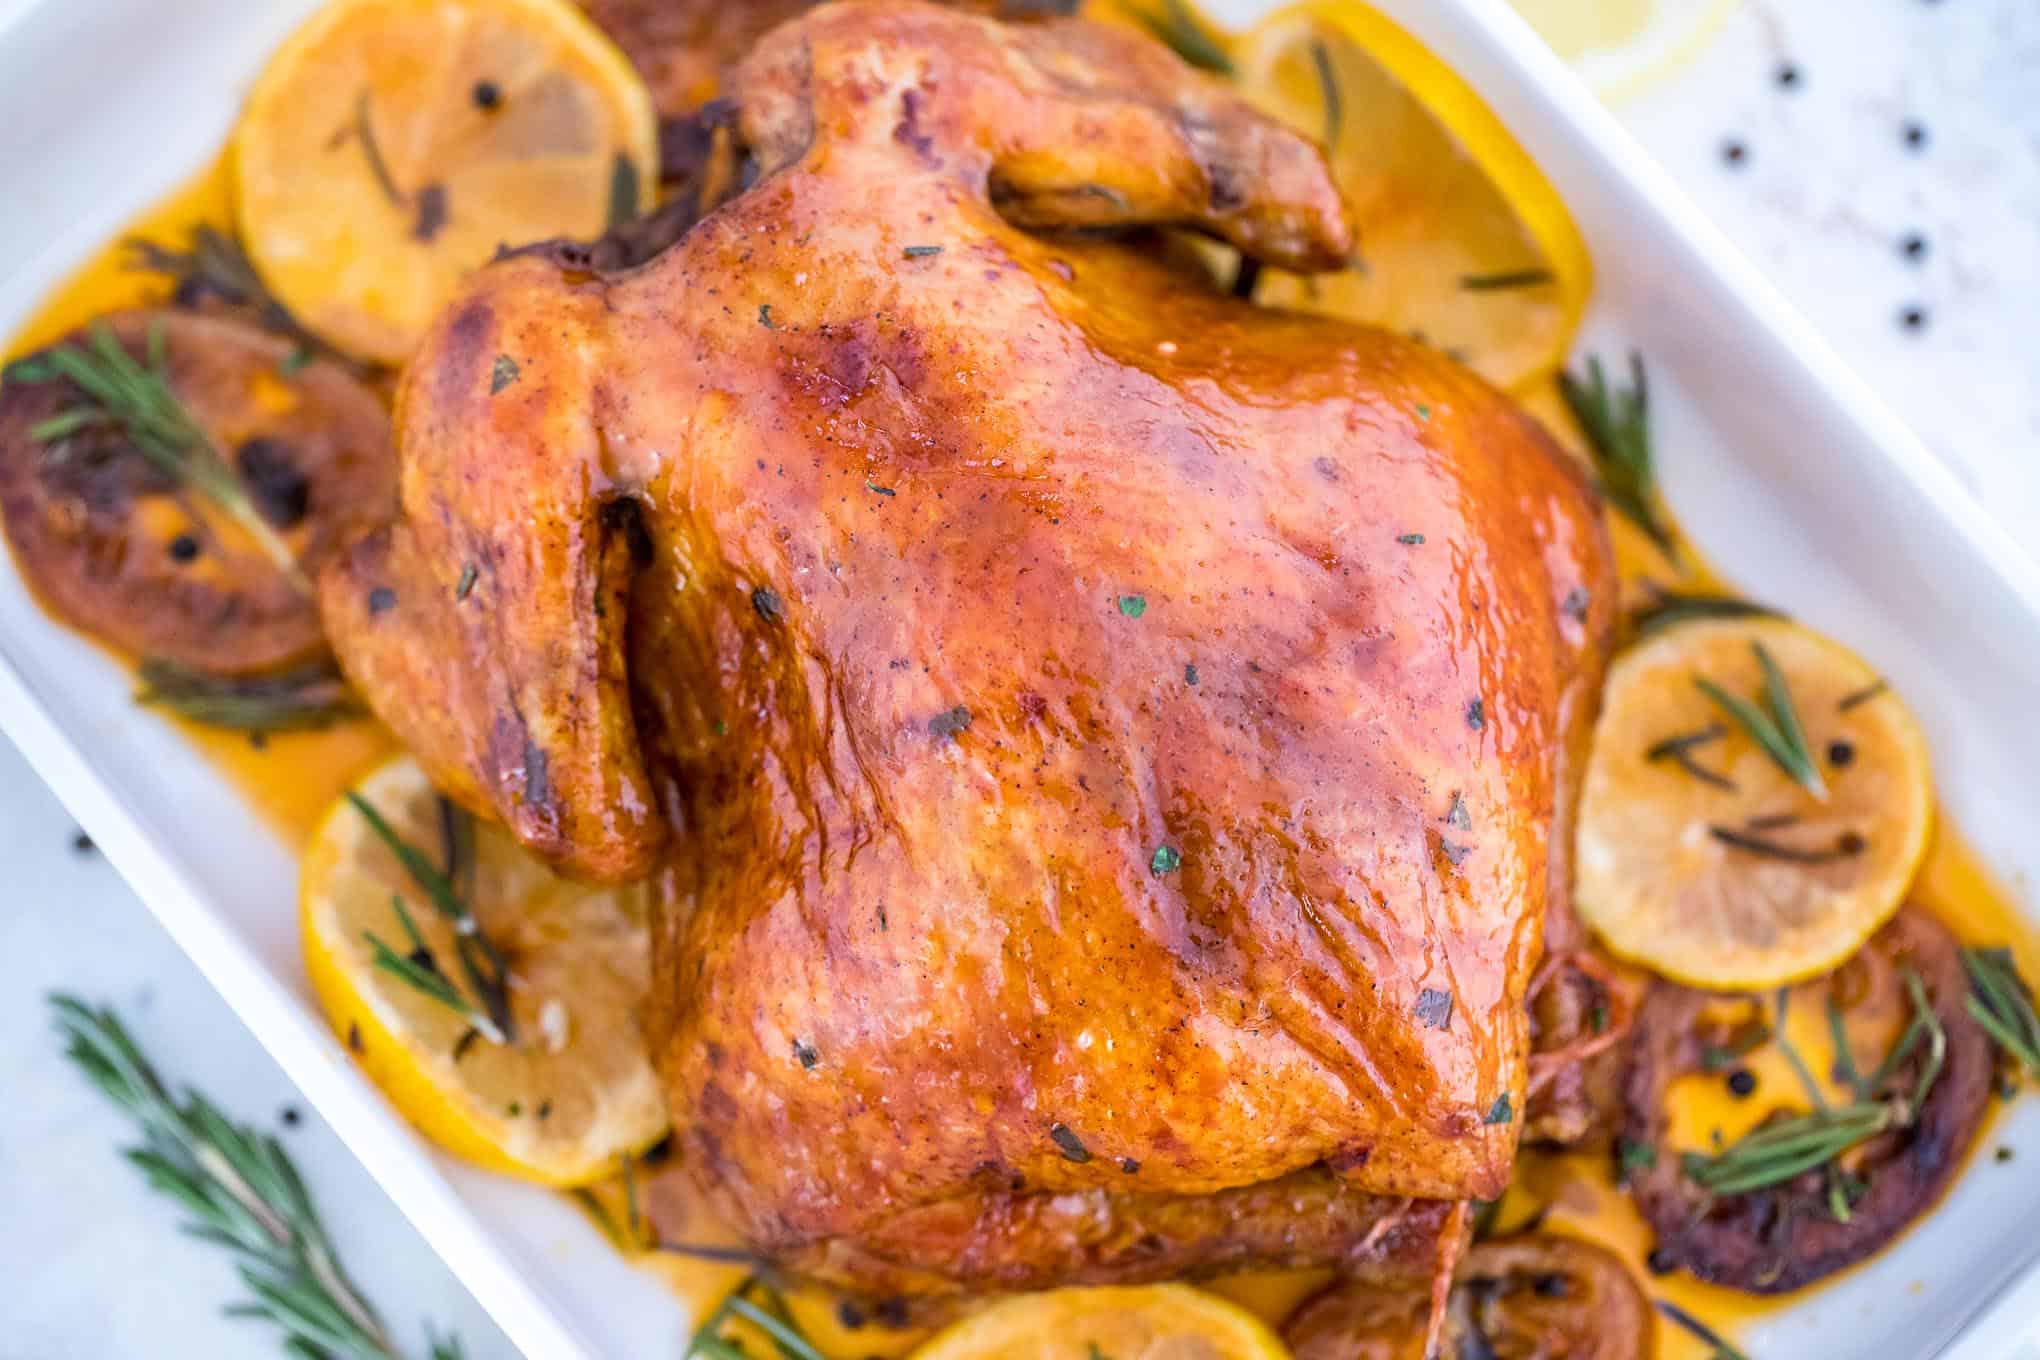 Baked chicken with lemon and fresh herbs